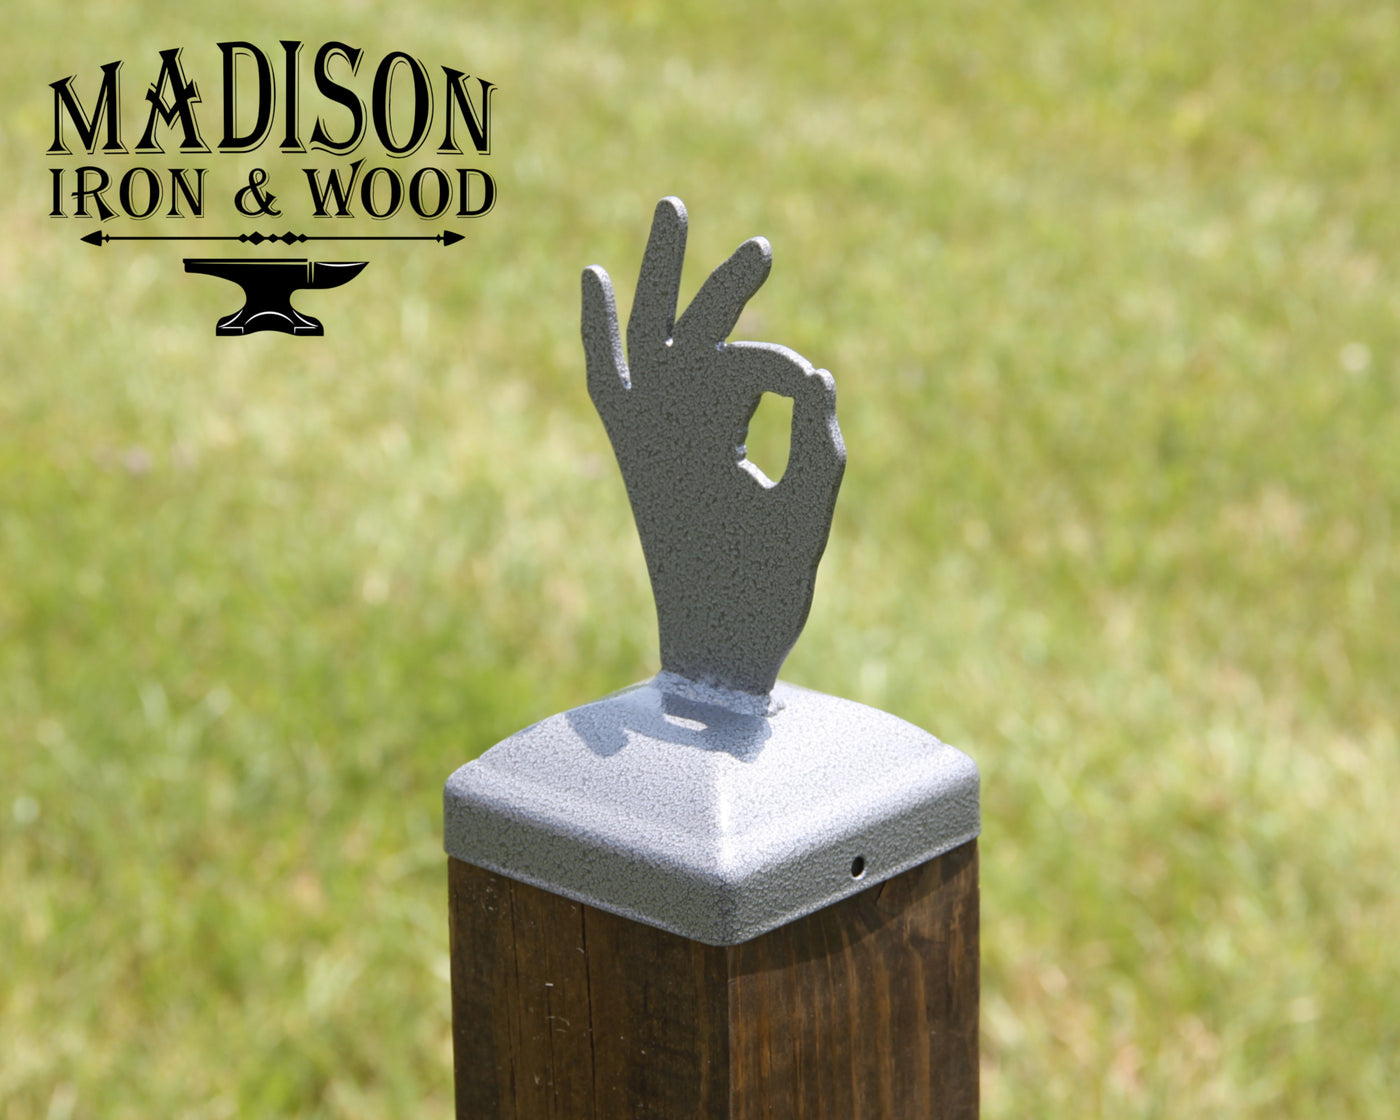 4x4 OK Hand Gesture Post Cap - Madison Iron and Wood - Post Cap - metal outdoor decor - Steel deocrations - american made products - veteran owned business products - fencing decorations - fencing supplies - custom wall decorations - personalized wall signs - steel - decorative post caps - steel post caps - metal post caps - brackets - structural brackets - home improvement - easter - easter decorations - easter gift - easter yard decor